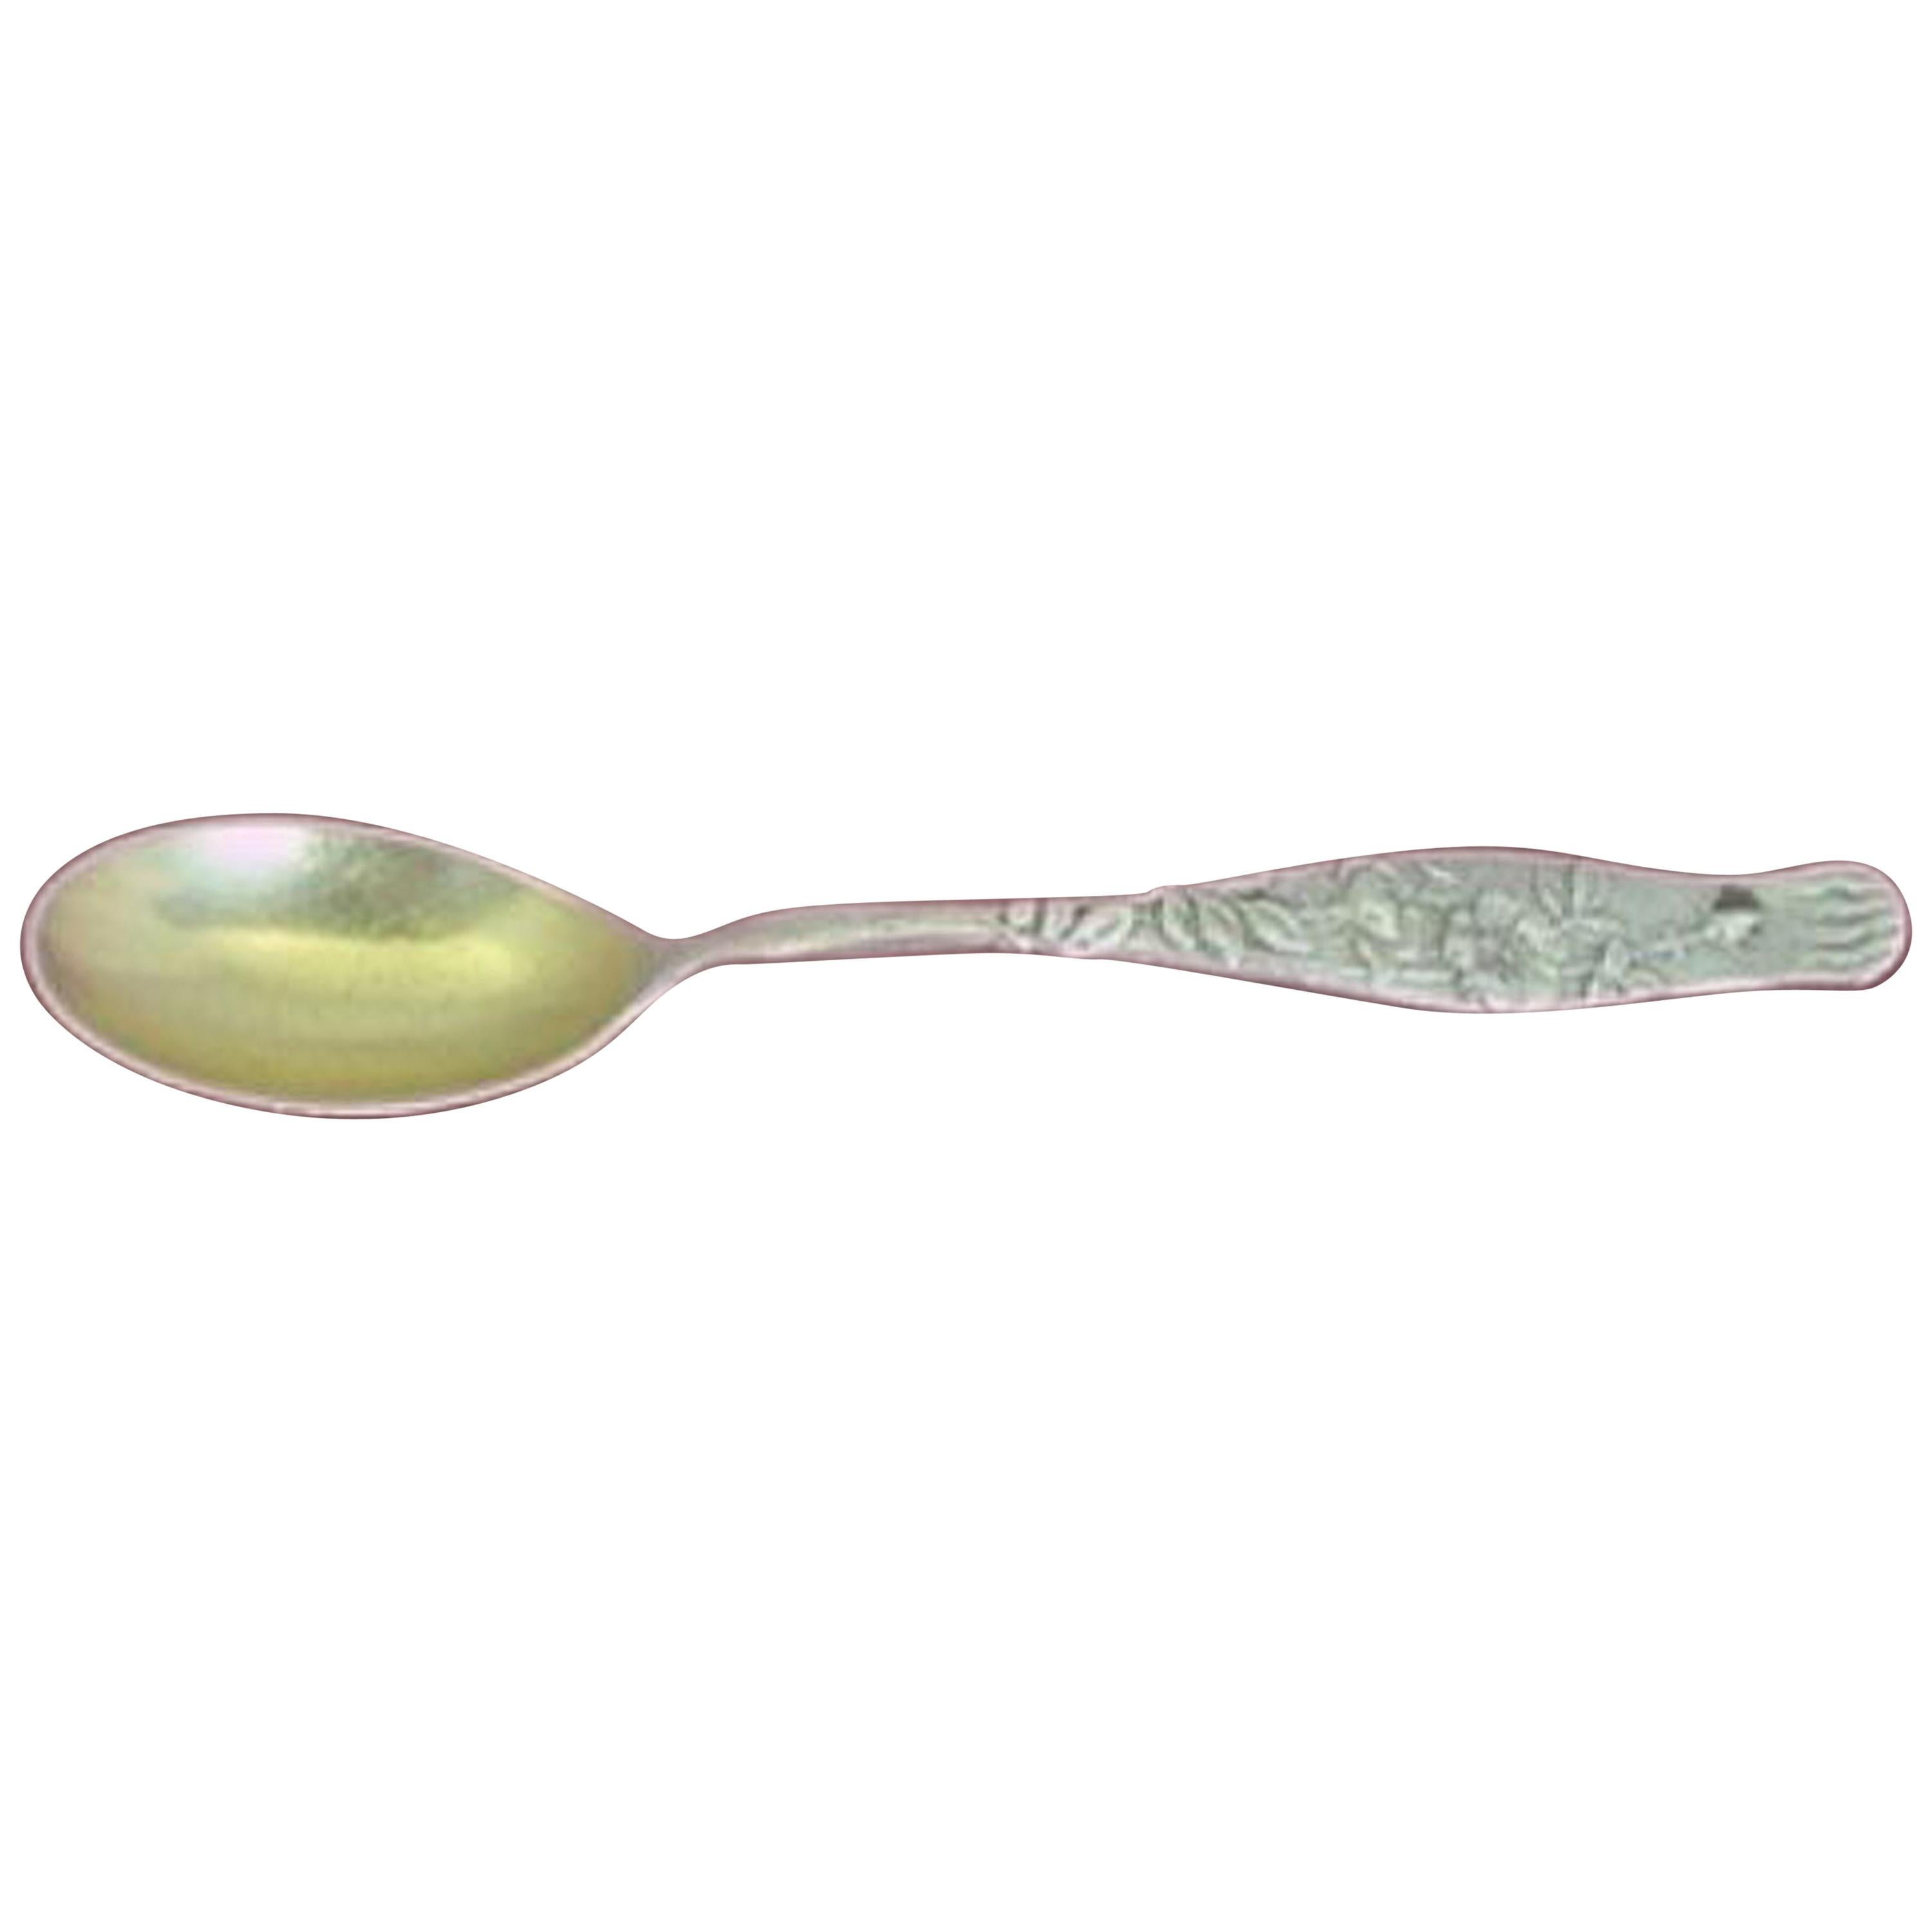 Vine by Tiffany & Co. Sterling Silver Demitasse Spoon Gold Washed Wild Rose